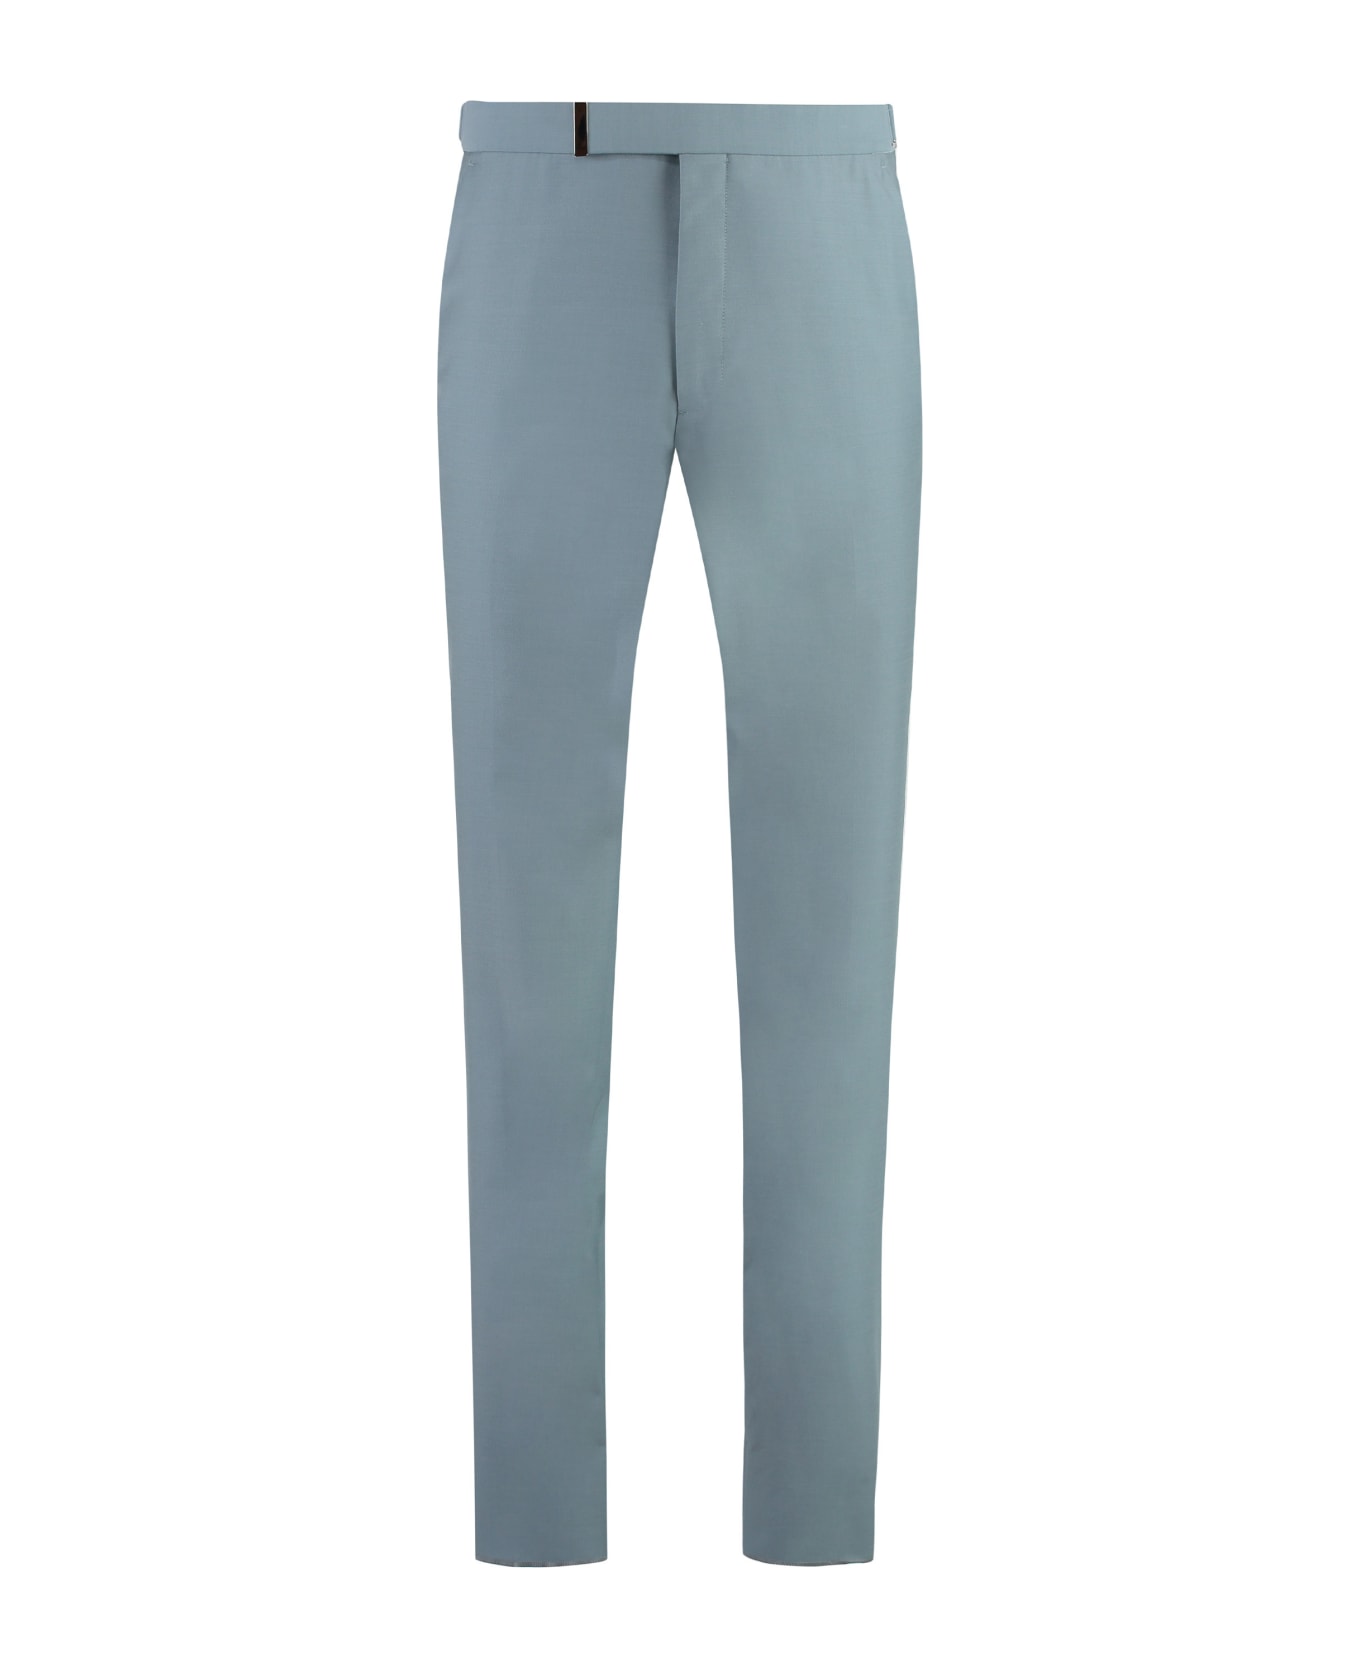 Tom Ford Wool And Silk Pants - Light Blue ボトムス